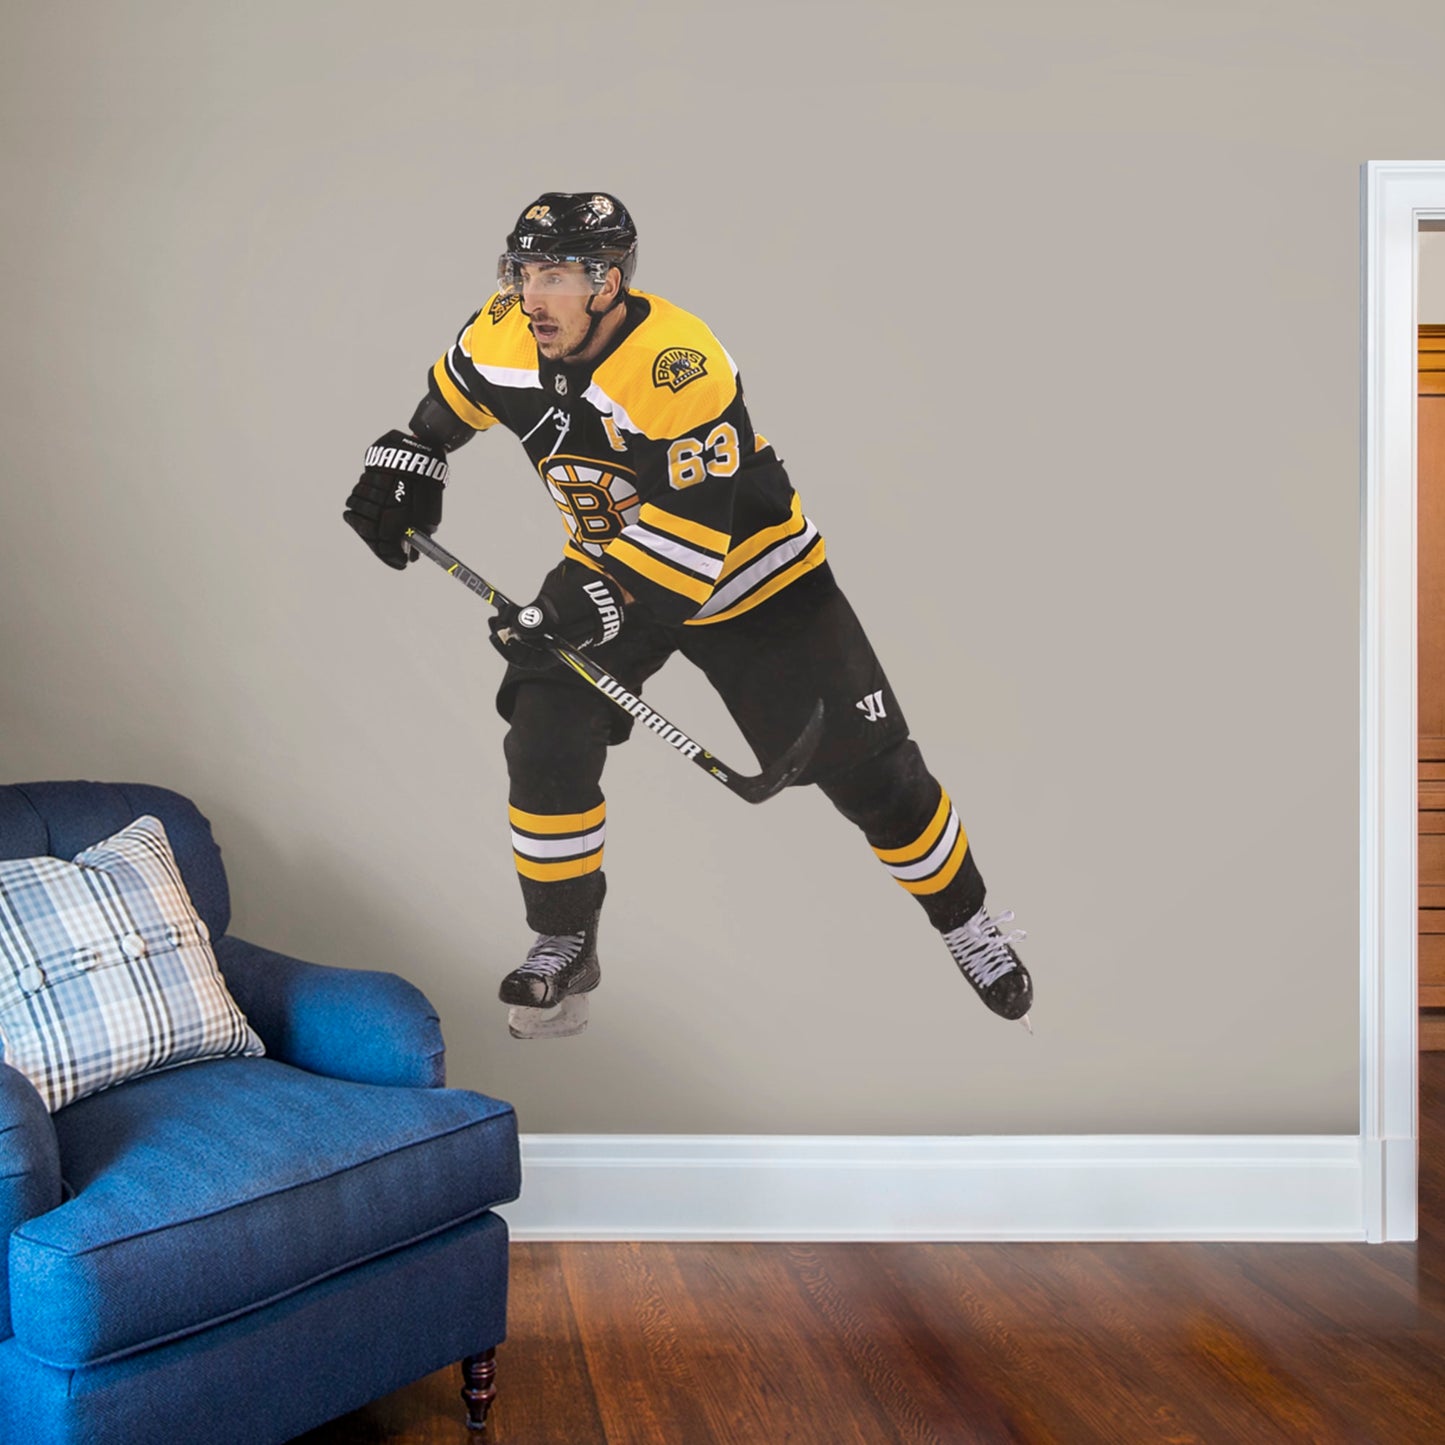 Life-Size Athlete + 2 Decals (58"W x 70"H) Bruins fans know that the opposing team should be scared when Brad Marchand hits the ice, and now you can bring that action to life in your own home with this Officially Licensed NHL Removable Wall Decal! Seen here in the Boston home uniform, this removable and reusable decal of Marchand is bold and durable, making it the perfect addition to your bedroom, office, or fan room. Go Bruins!